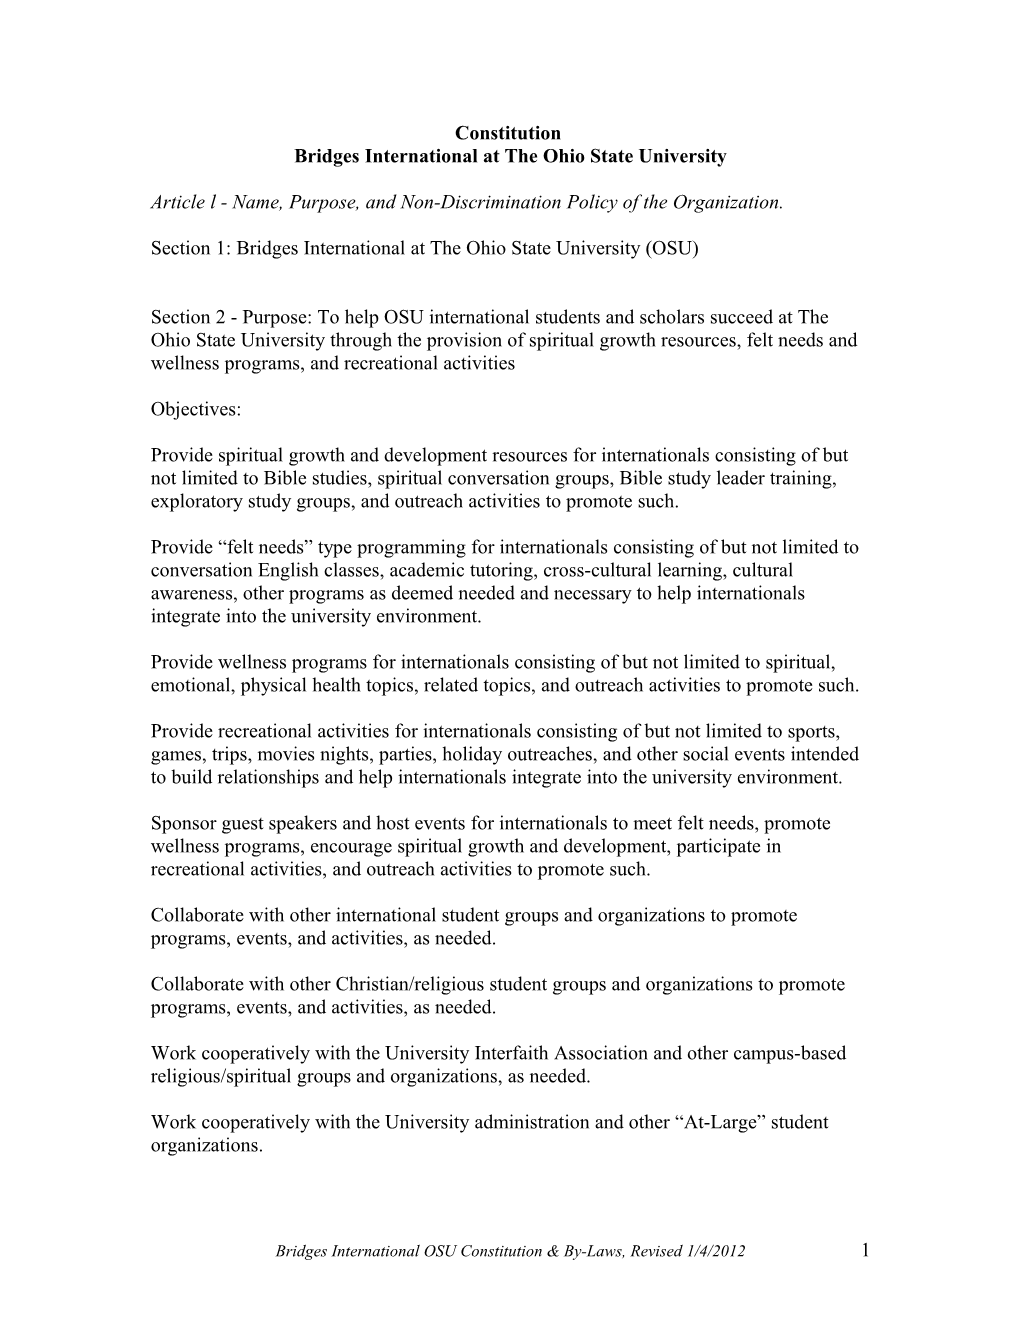 Constitution and By-Laws Guidelines for Student Organizations